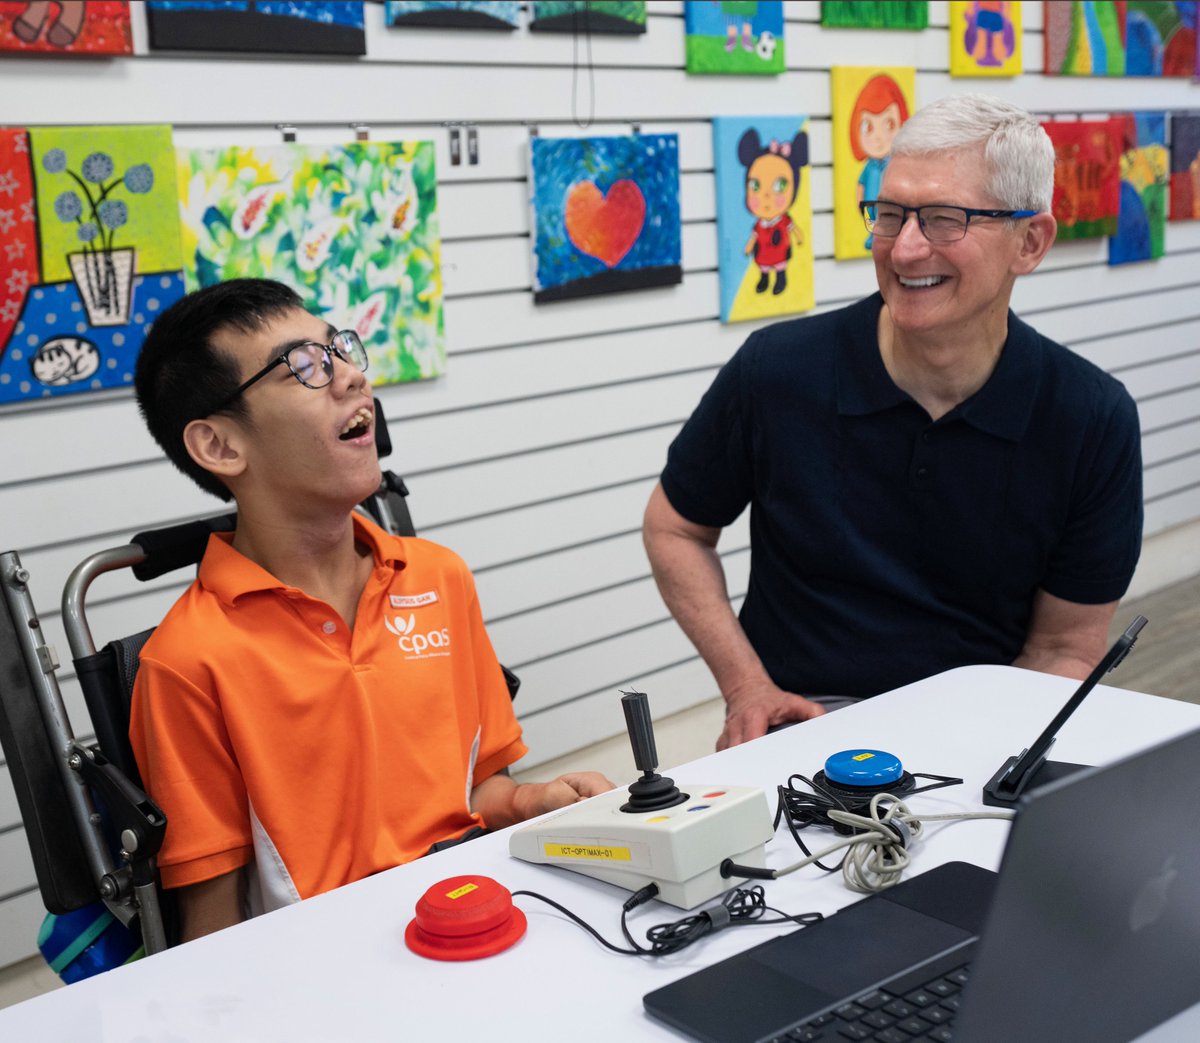 At Apple, we believe technology should be made for everyone. It was powerful to see students and educators at the Cerebral Palsy Alliance School Singapore using our accessibility features, like Switch Control and Live Speech, to help learn, communicate, and create.